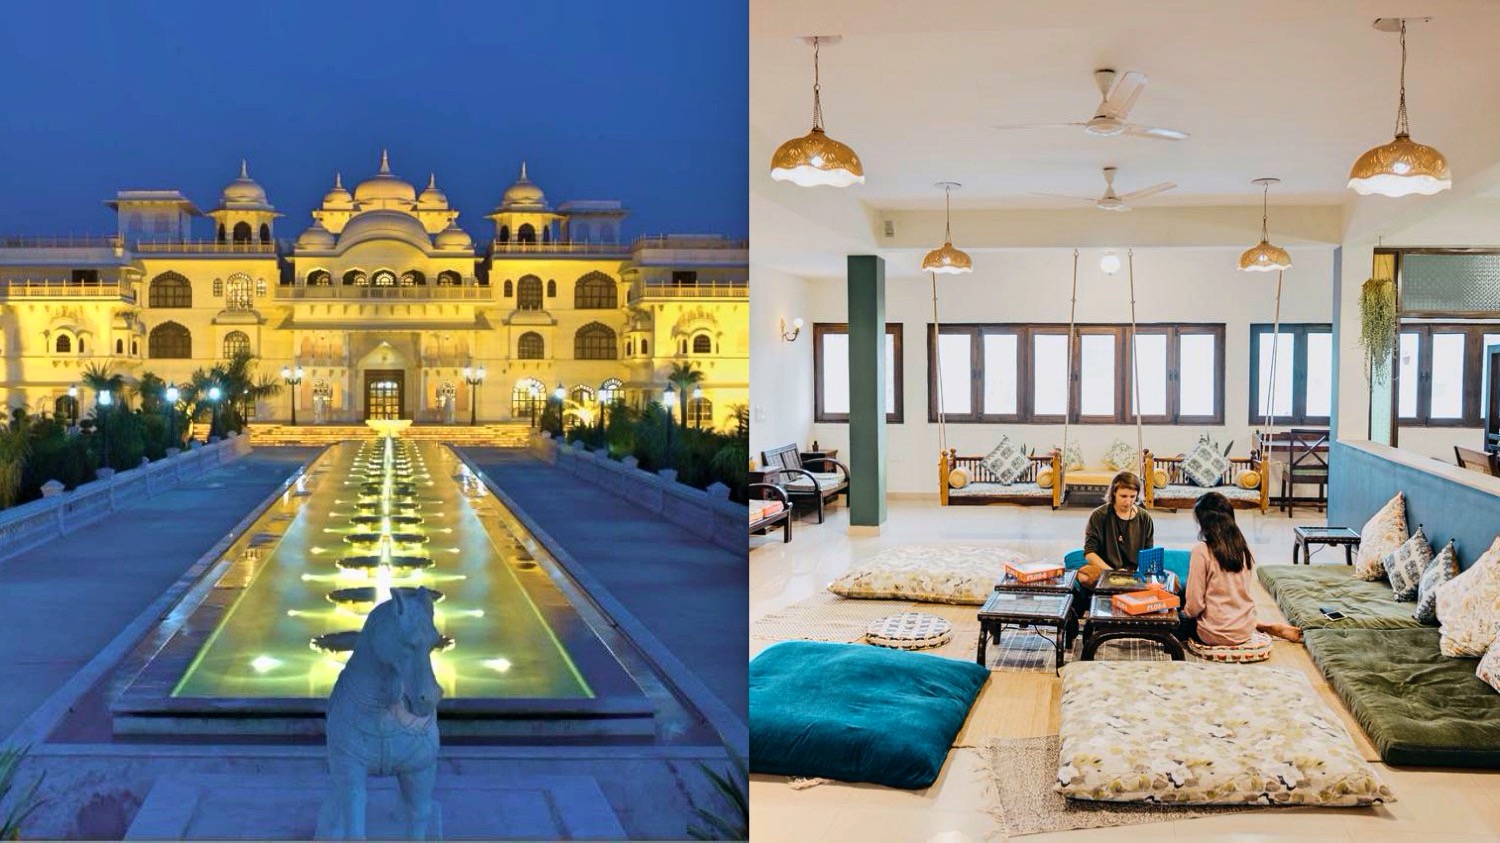 Starting At ₹280, Here Are The Best Places To Stay In Jaipur For Every